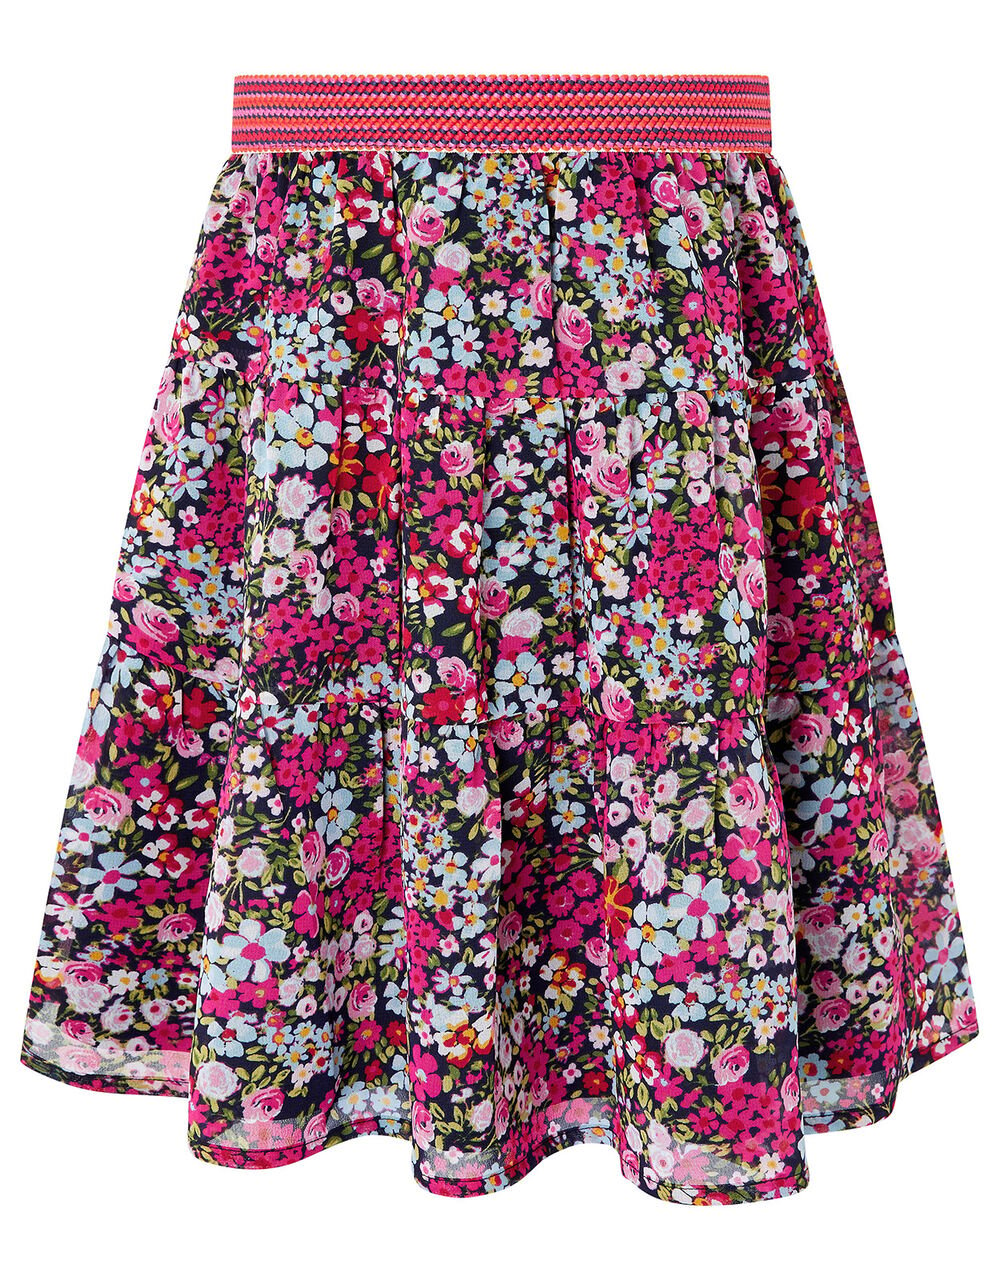 Ditsy Floral Midi Skirt in Recycled Fabric Pink | Girls' Skirts ...